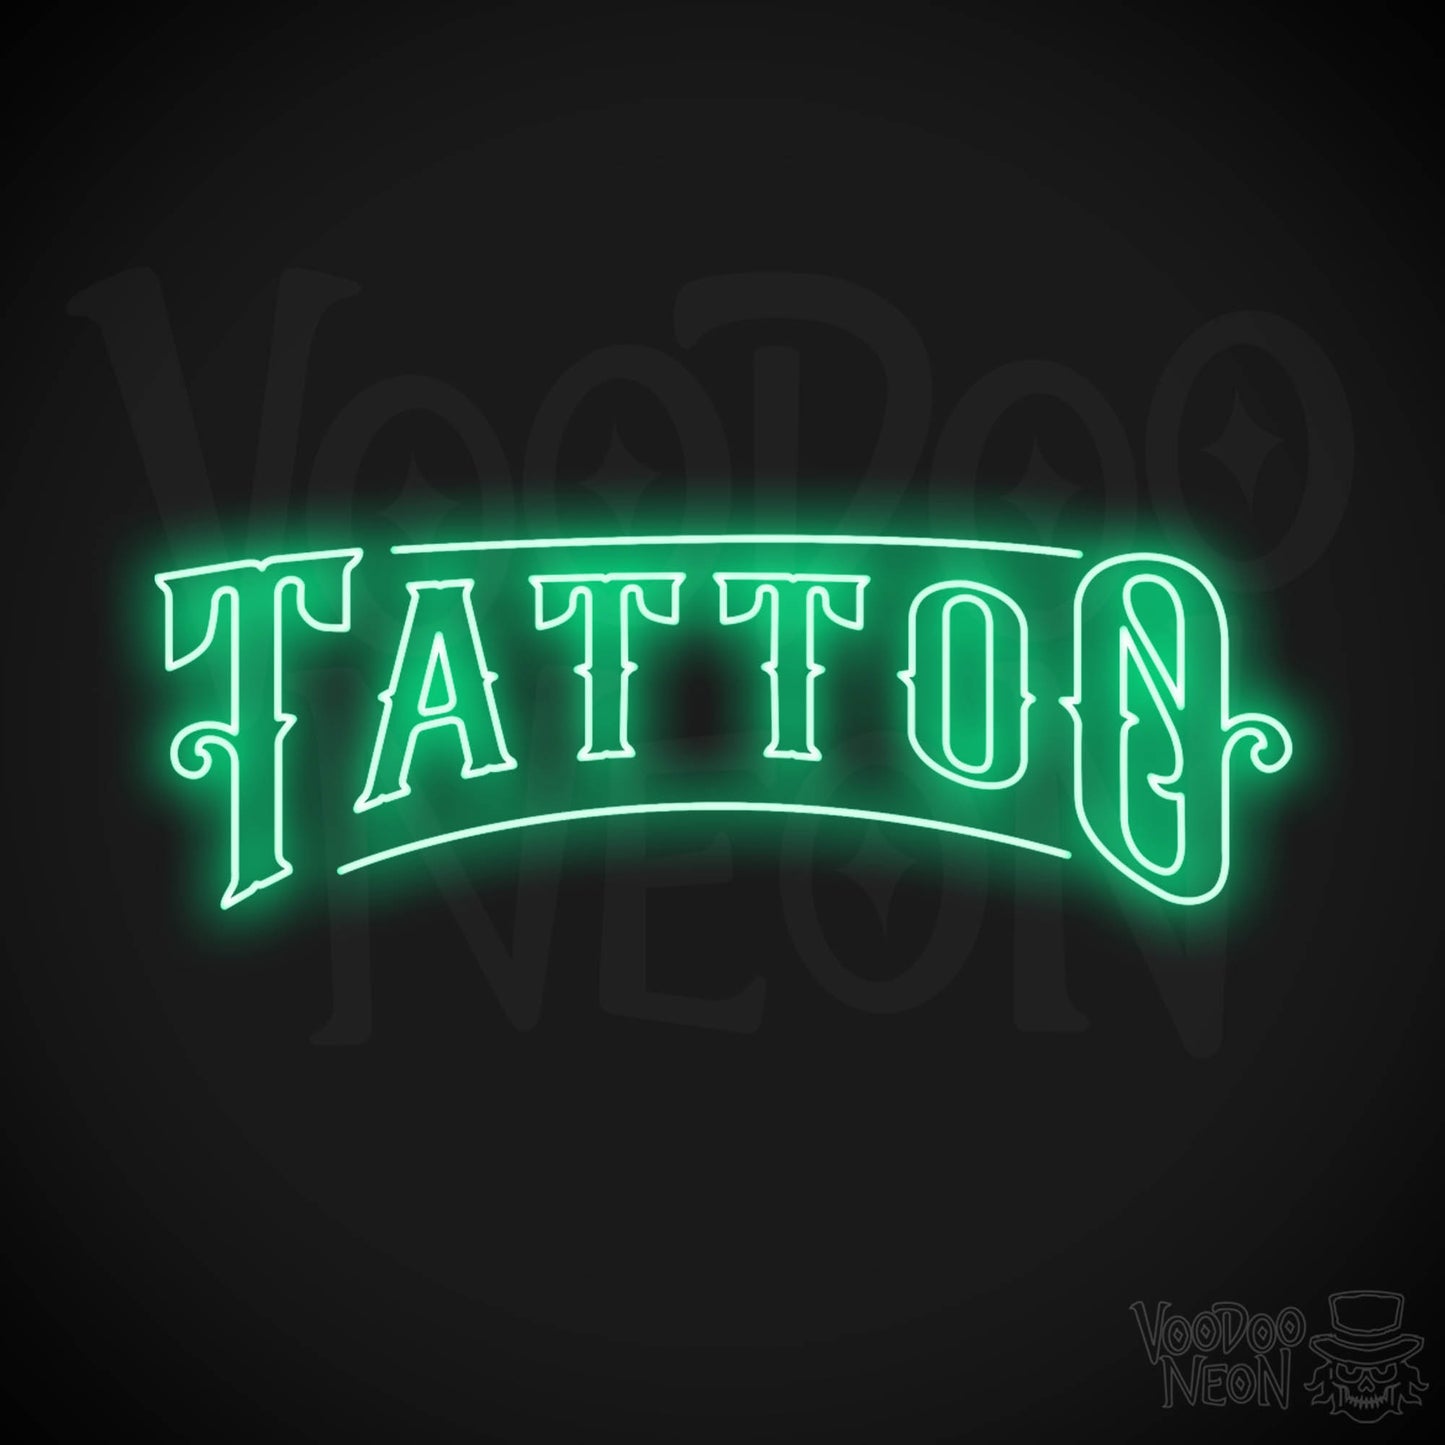 Tattoo Parlor LED Neon - Green